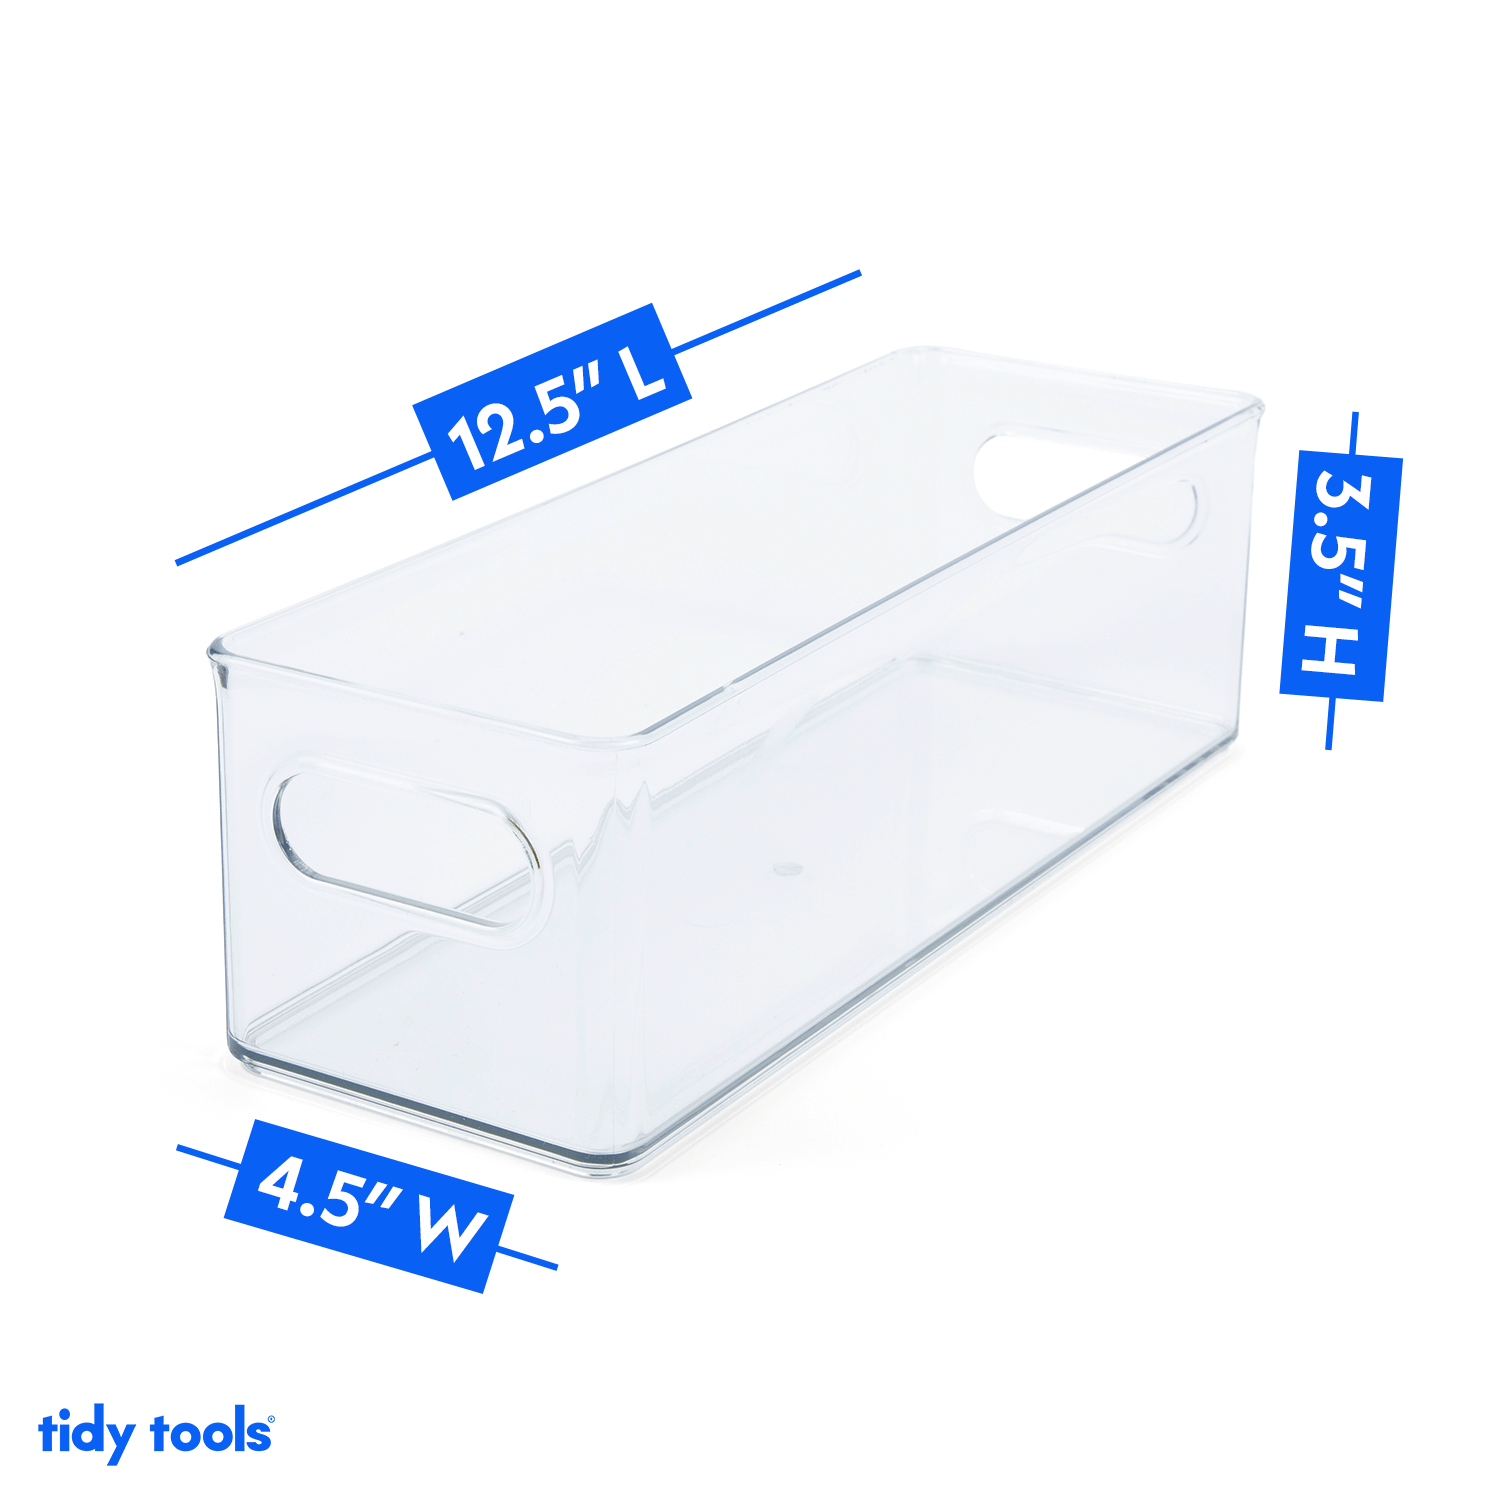 Tidy Tools Plastic Organizer Bins with Handle, 4 Pack